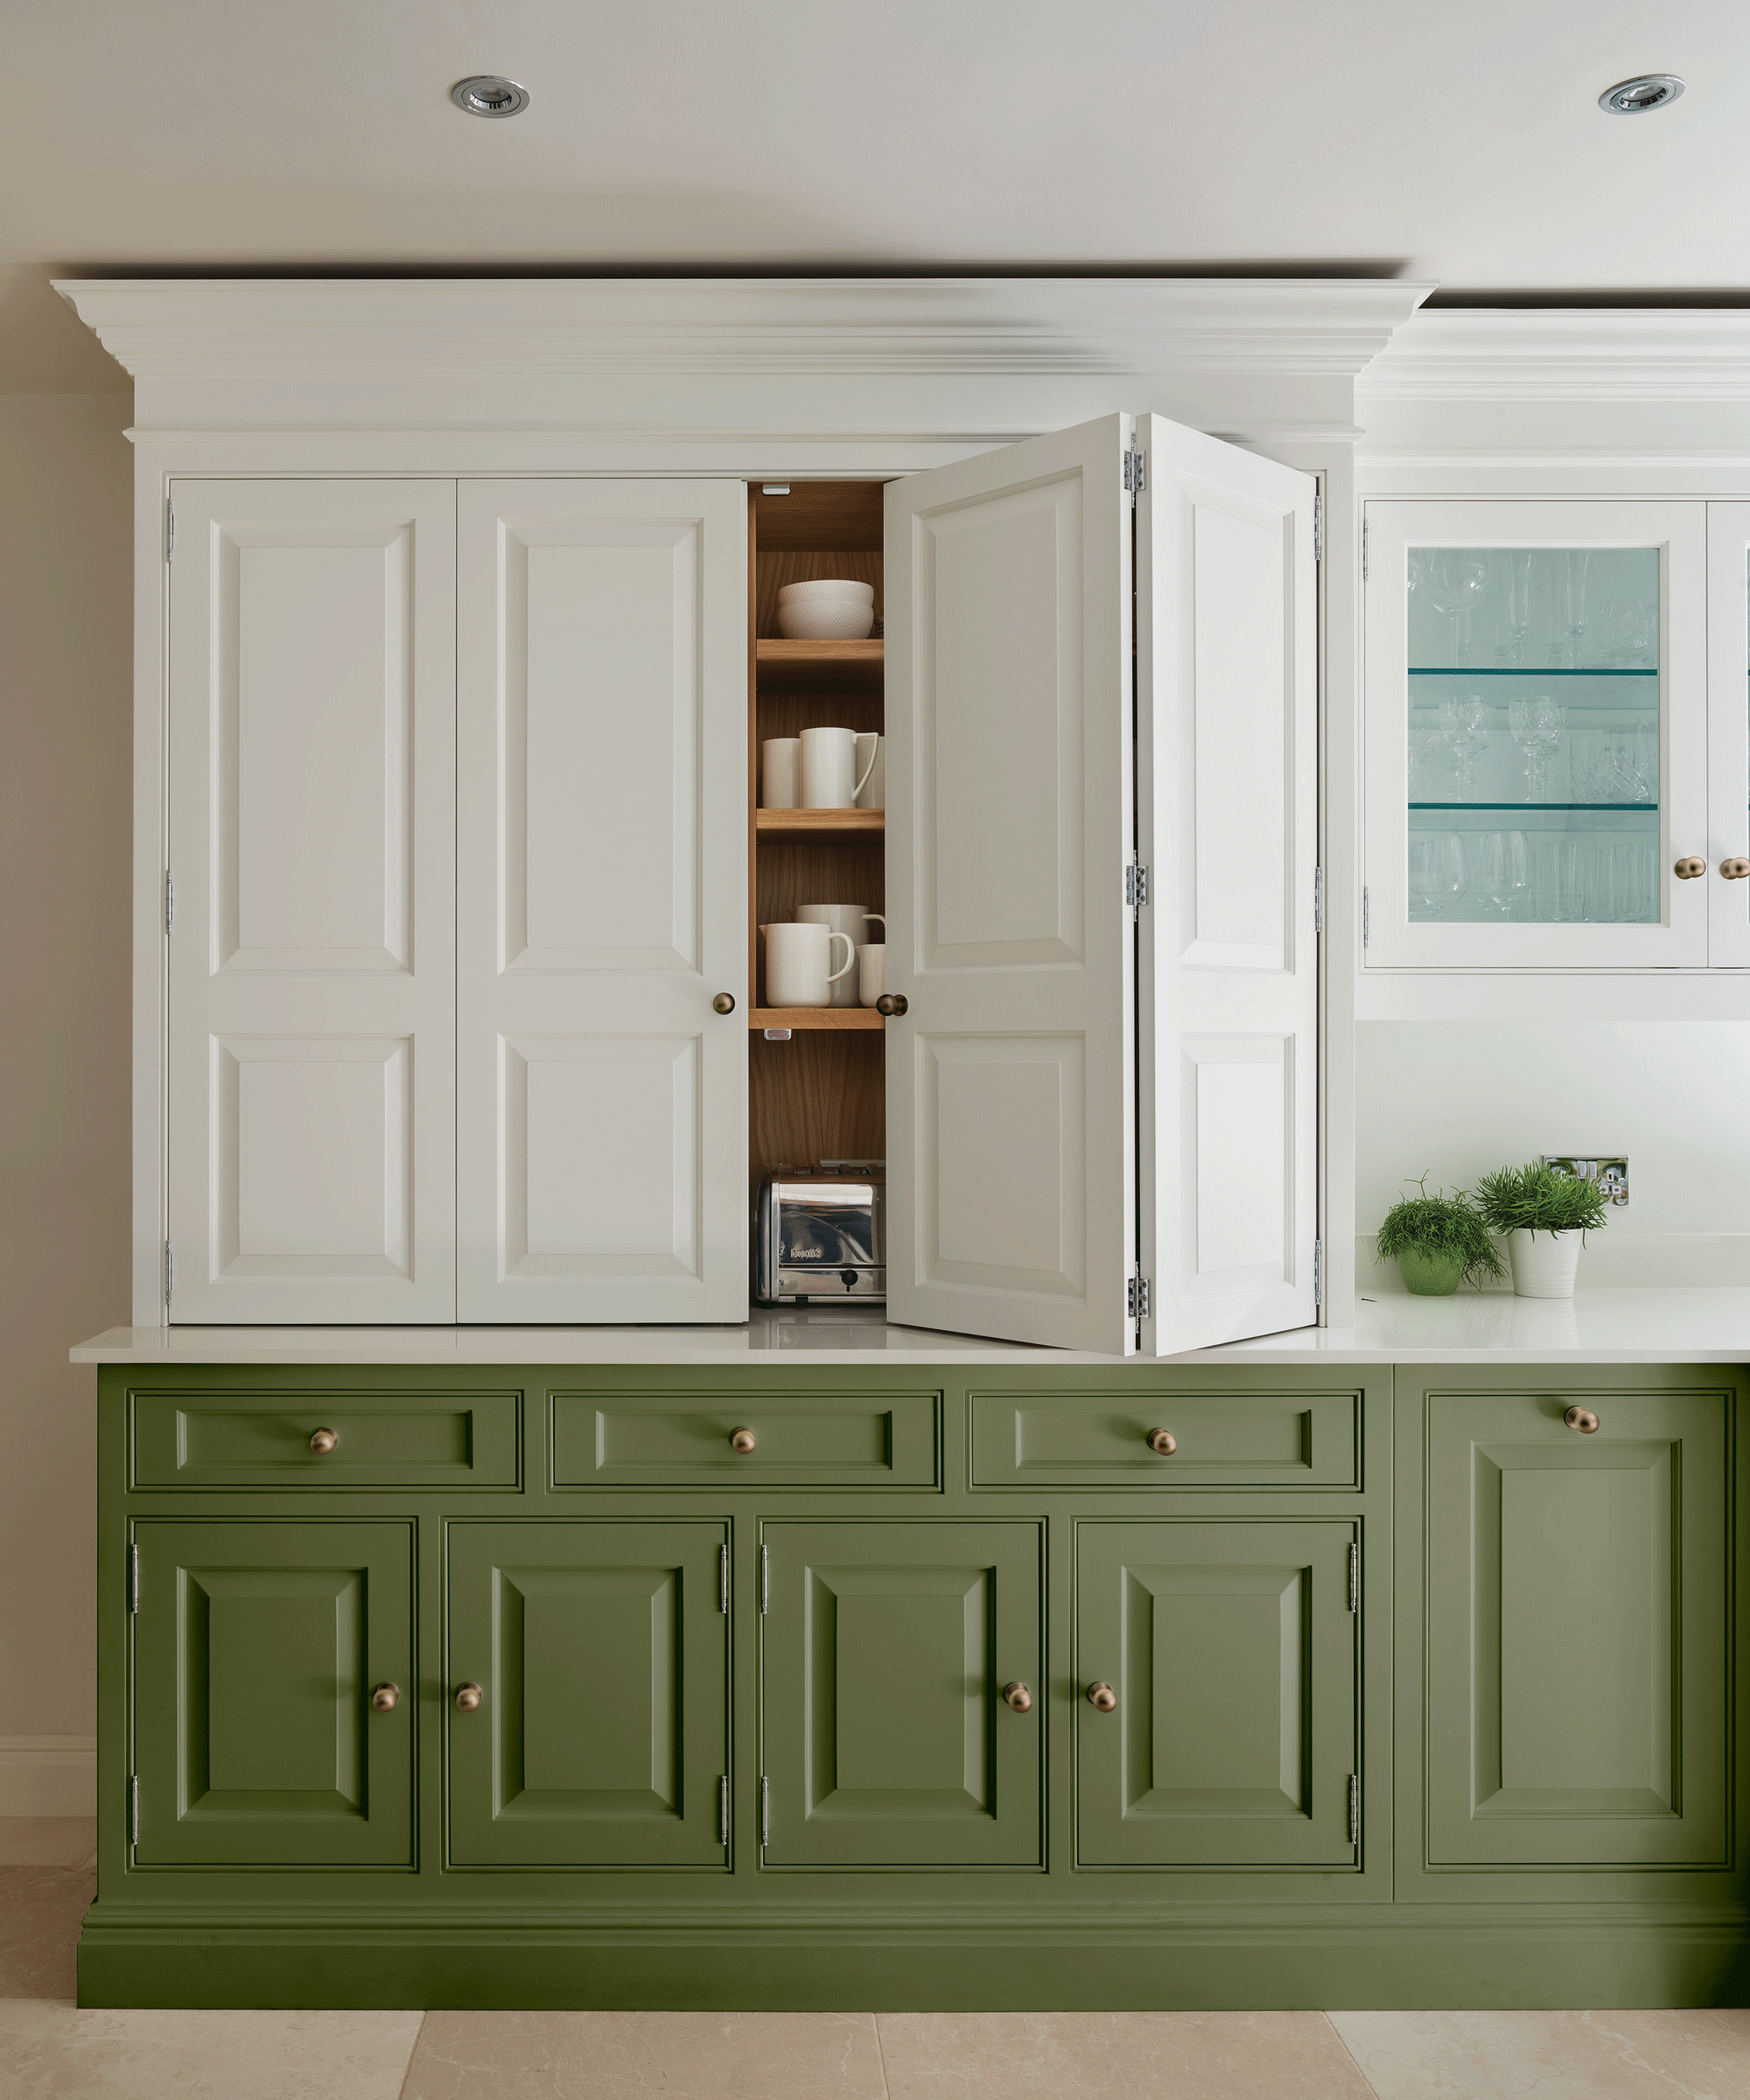 Two-tone kitchen with green and white cabinetry